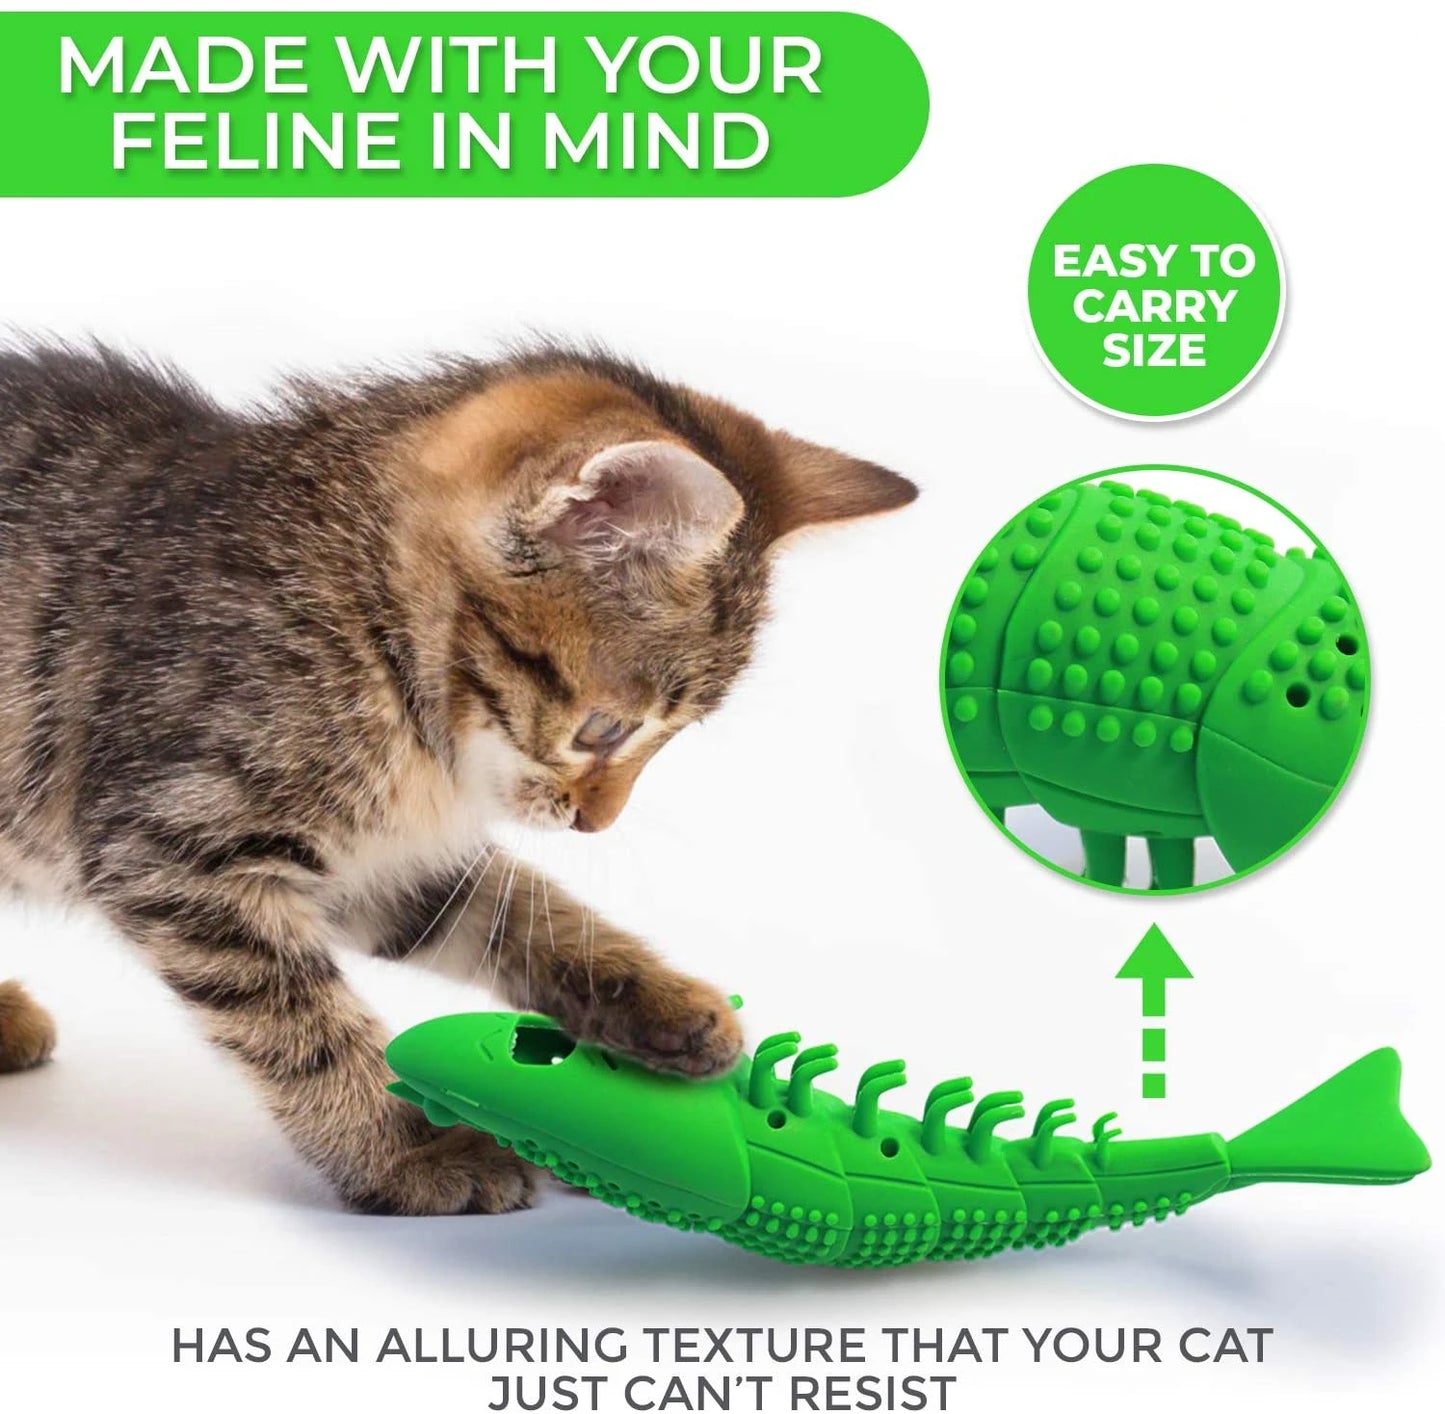 Cat Interactive Toothbrush Dental Care